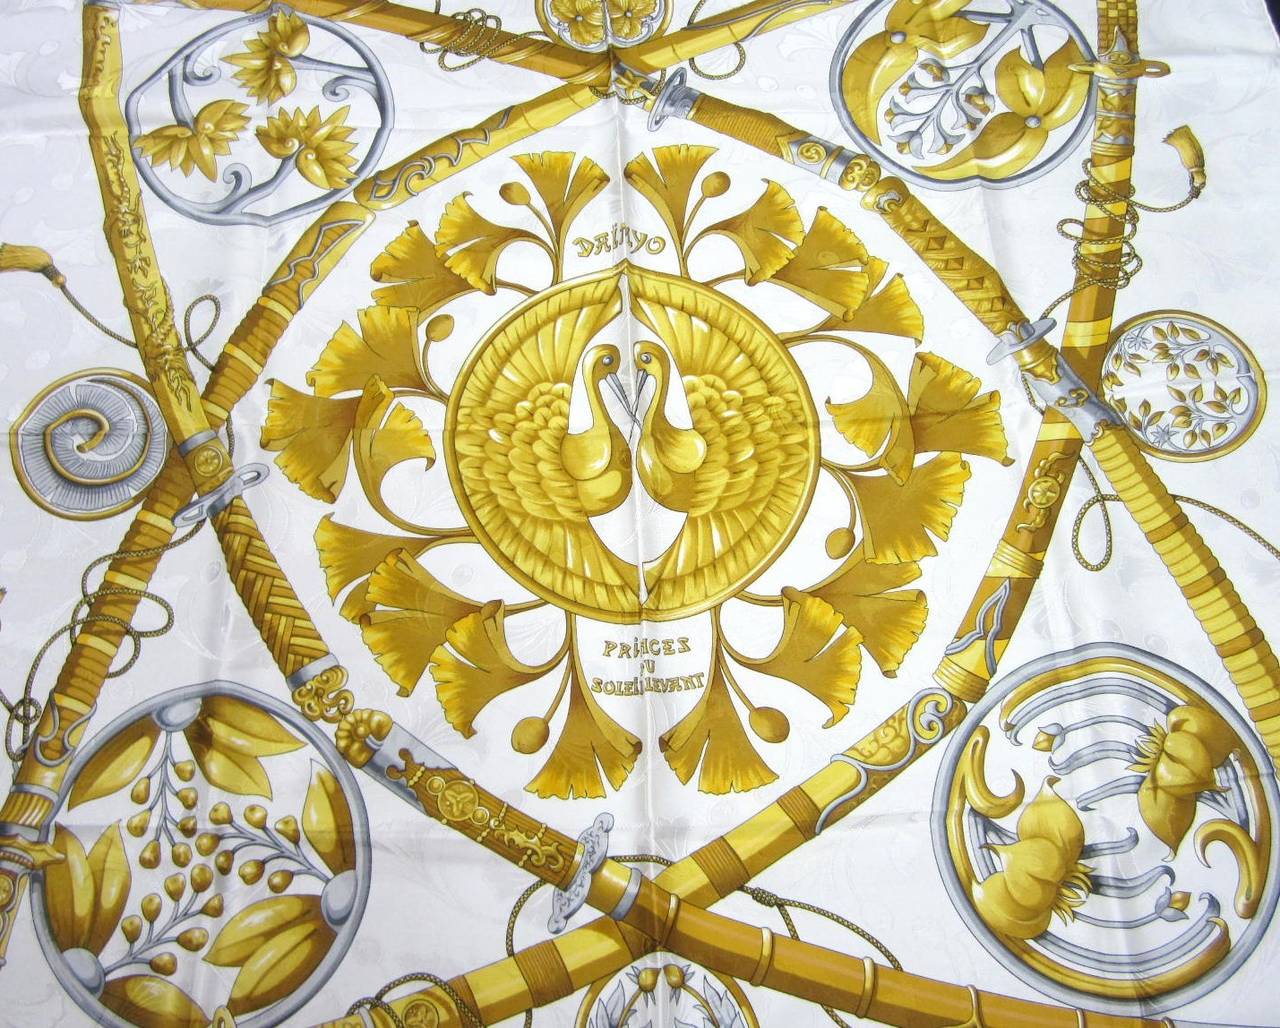 White background with gold, grays on this Hermes Silk Scarf Measures 34 in x 34 in. Never worn. Box included (box has a bit of wear at the corners) We have tons of silk scarves on our storefront Hermes, Gucci and Escada. Please be sure to check our